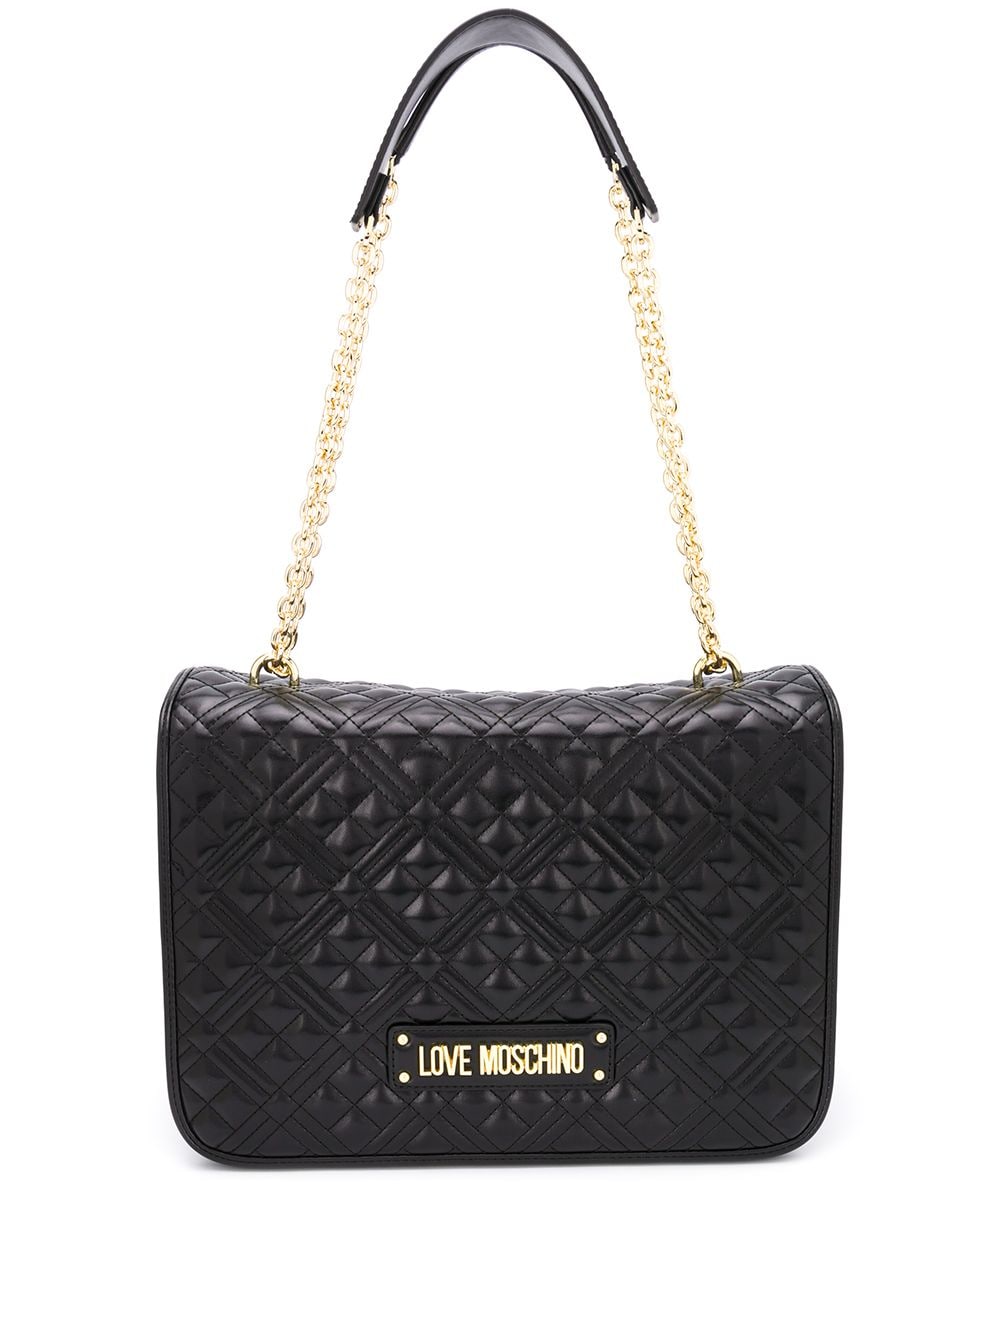 Love Moschino Faux Leather Quilted Shoulder Bag - Farfetch